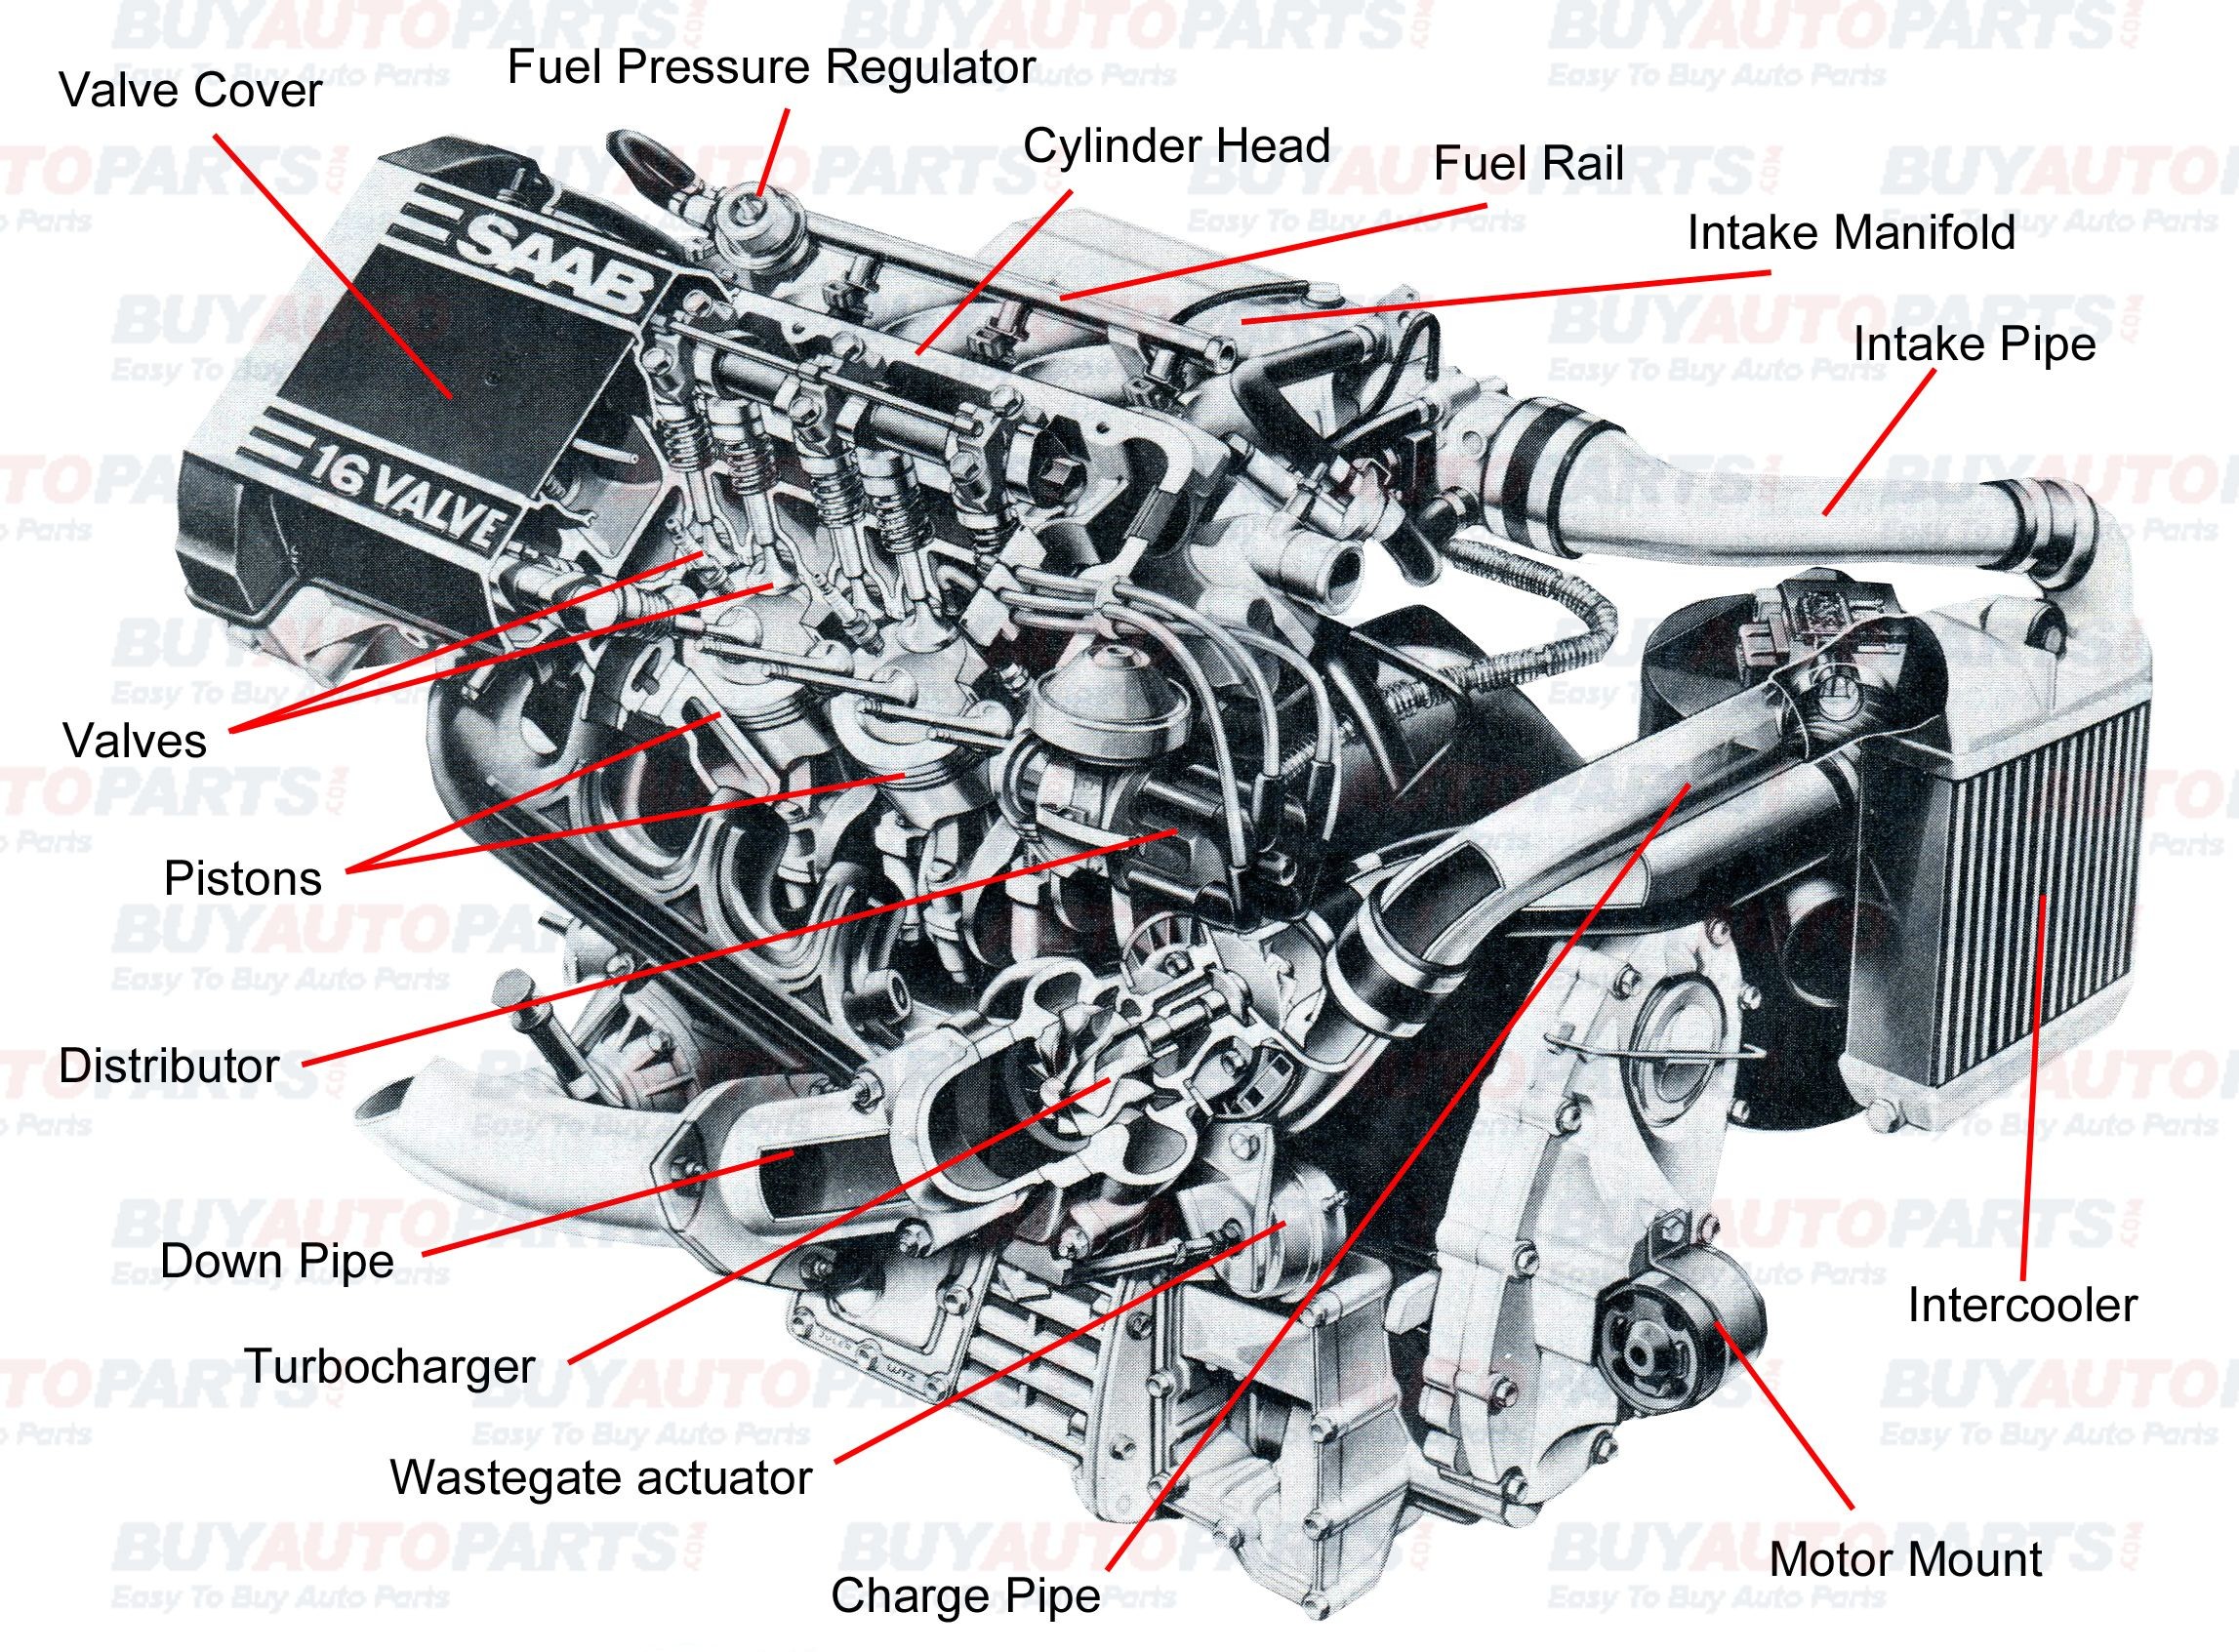 Labeled Engine Diagram Pin by Jimmiejanet Testellamwfz On What Does An Engine with Turbo Of Labeled Engine Diagram